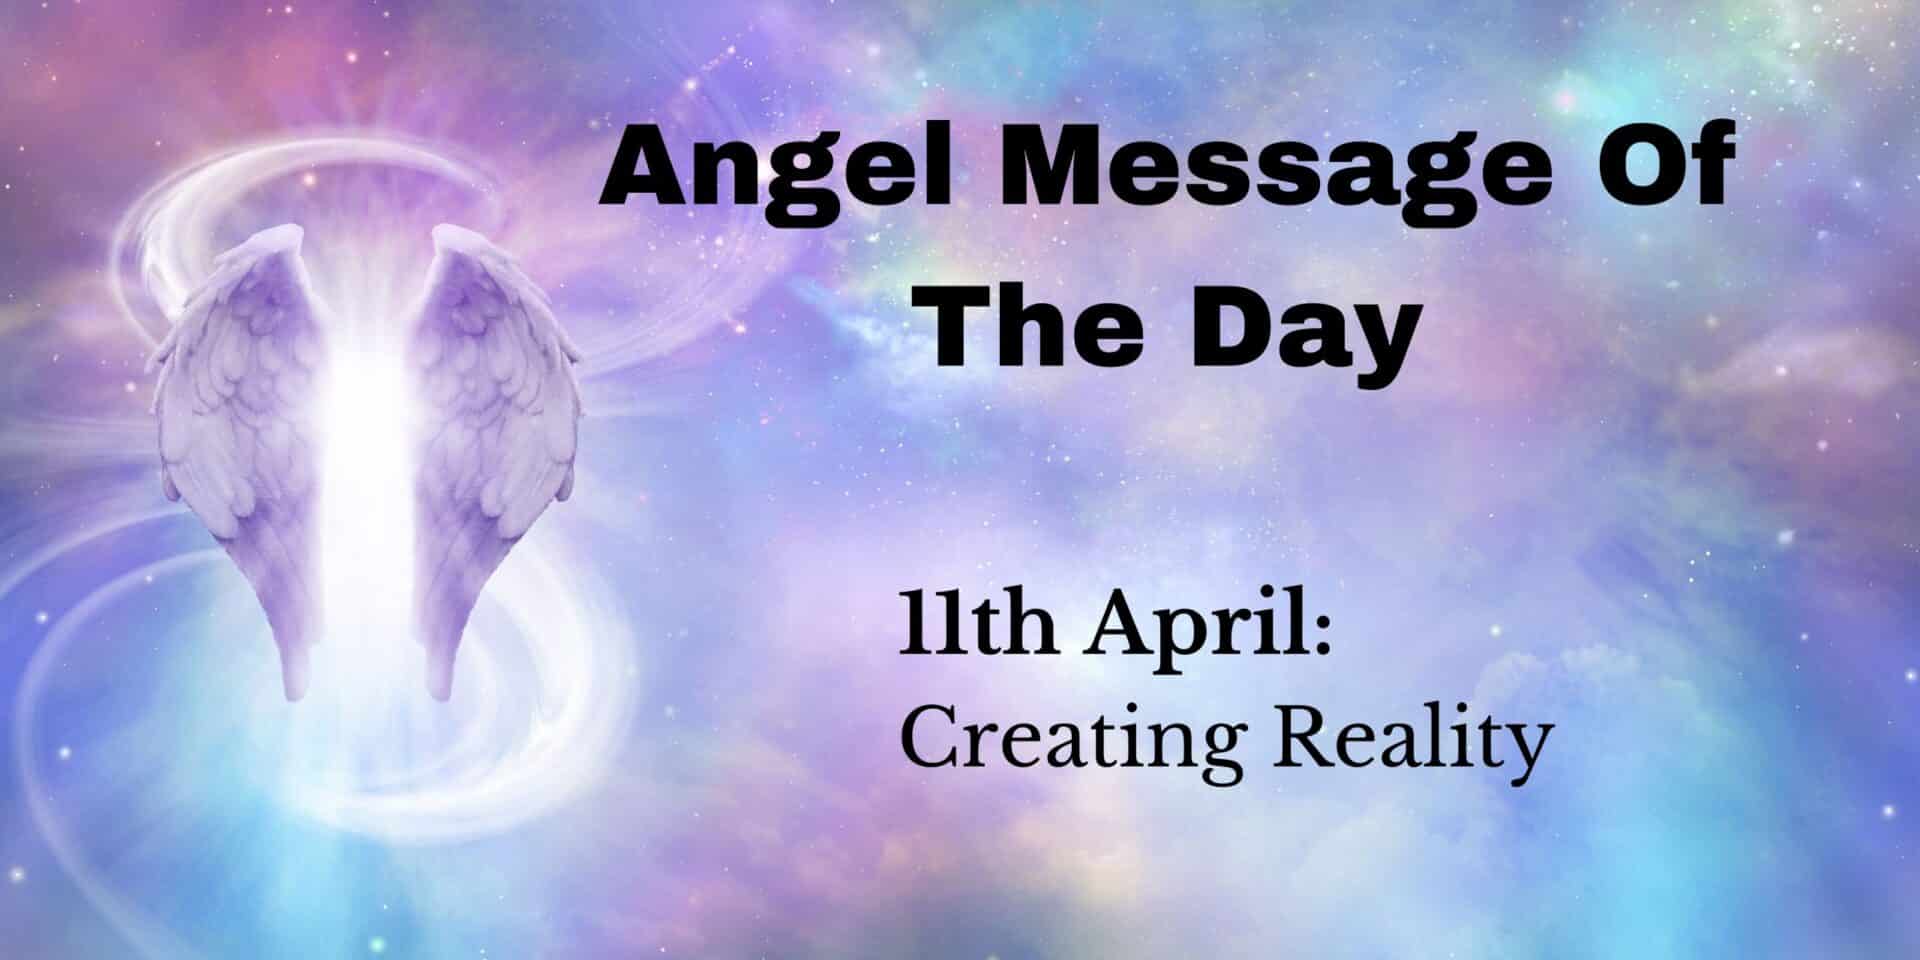 angel message of the day : creating reality